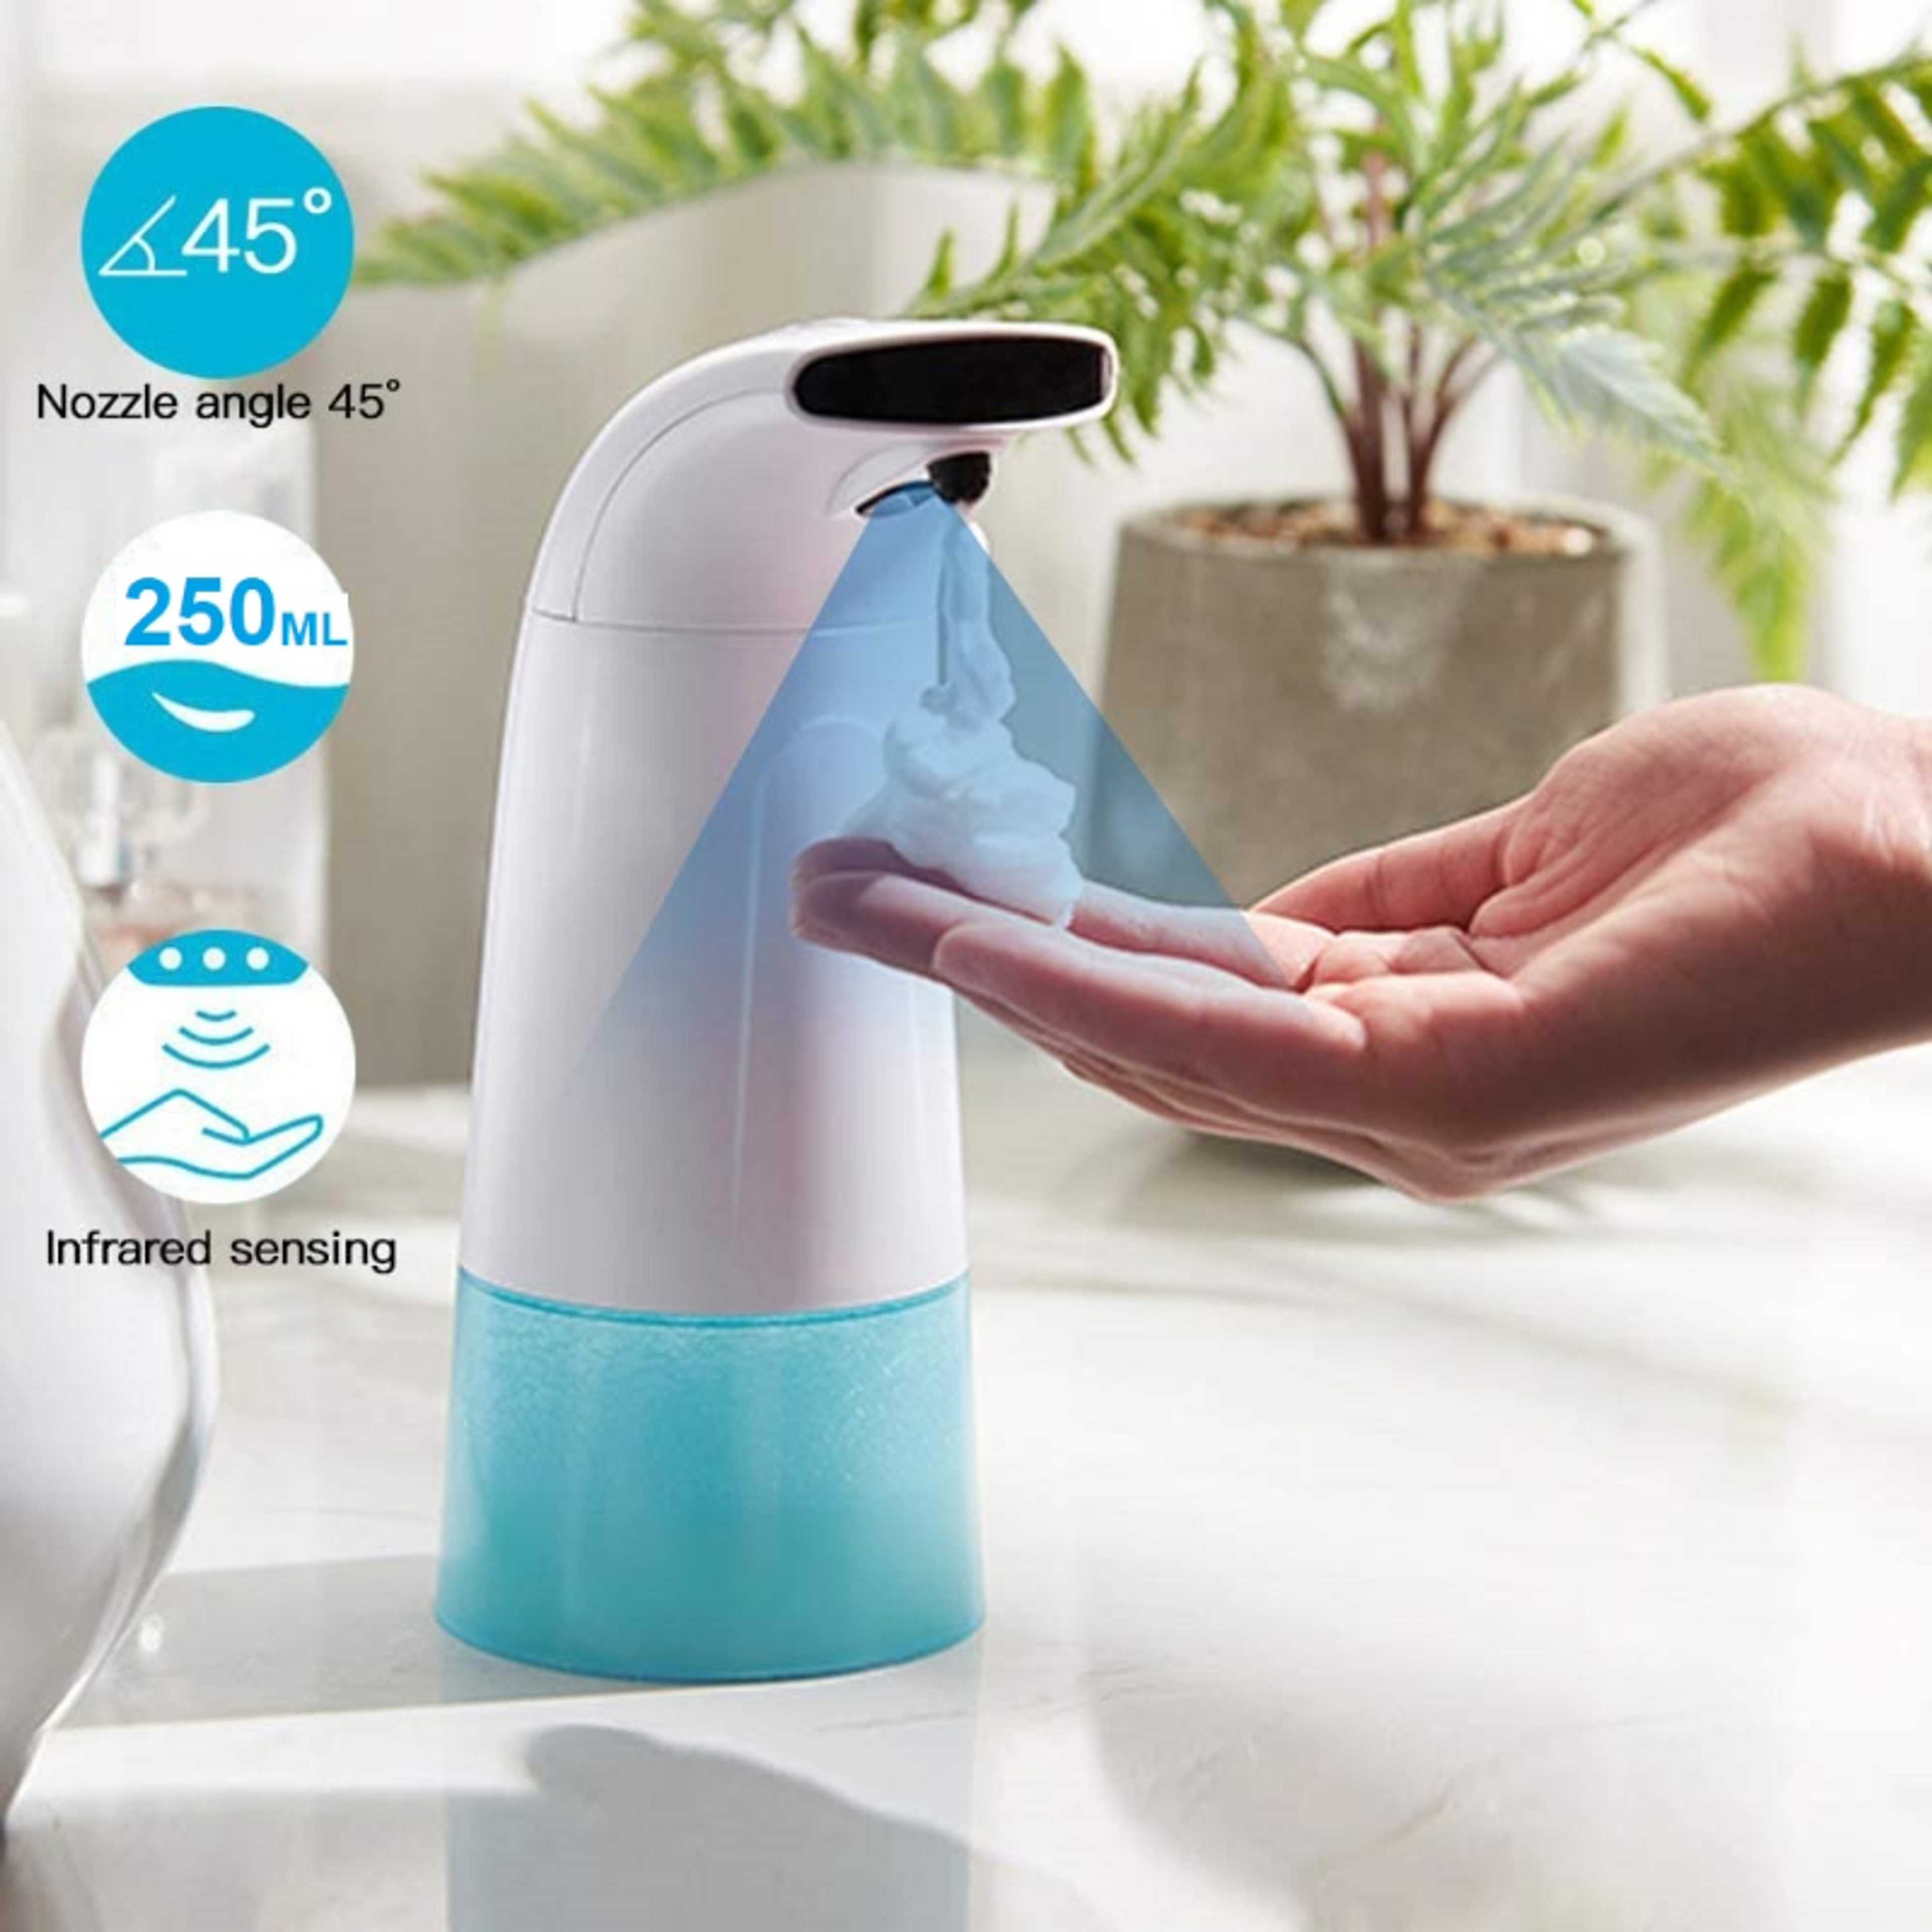 250ml Automatic Induction Touchless Foaming Soap Dispenser, Battery Operated Washing Hands Machine Touchless Foaming Infrared Motion Sensor Hands-Free Soap Pump Dispenser for Kitchen Bathroom